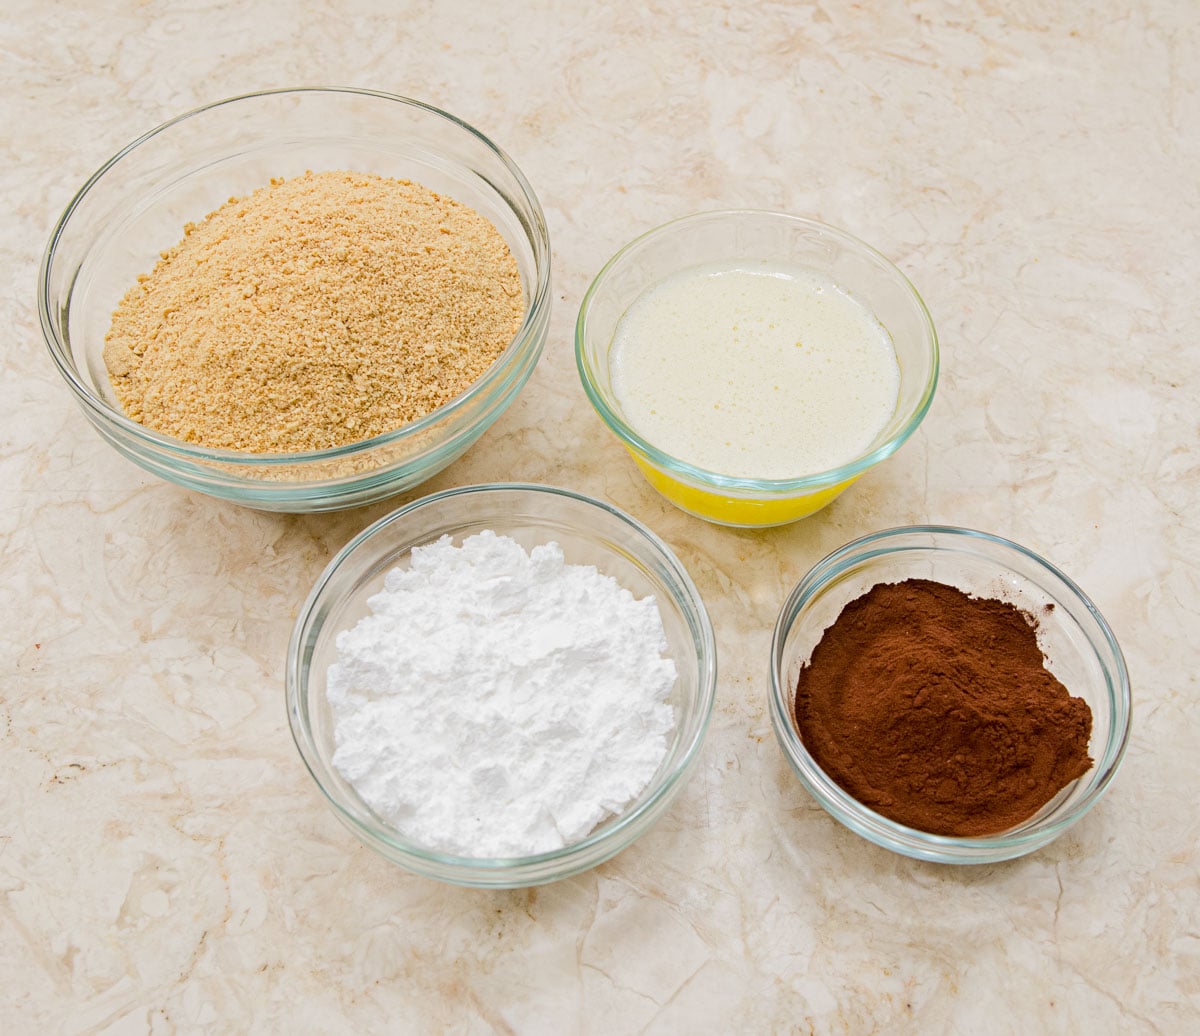 Crust ingredients are graham cracker crumbs, butter,powdered sugar and cocoa.